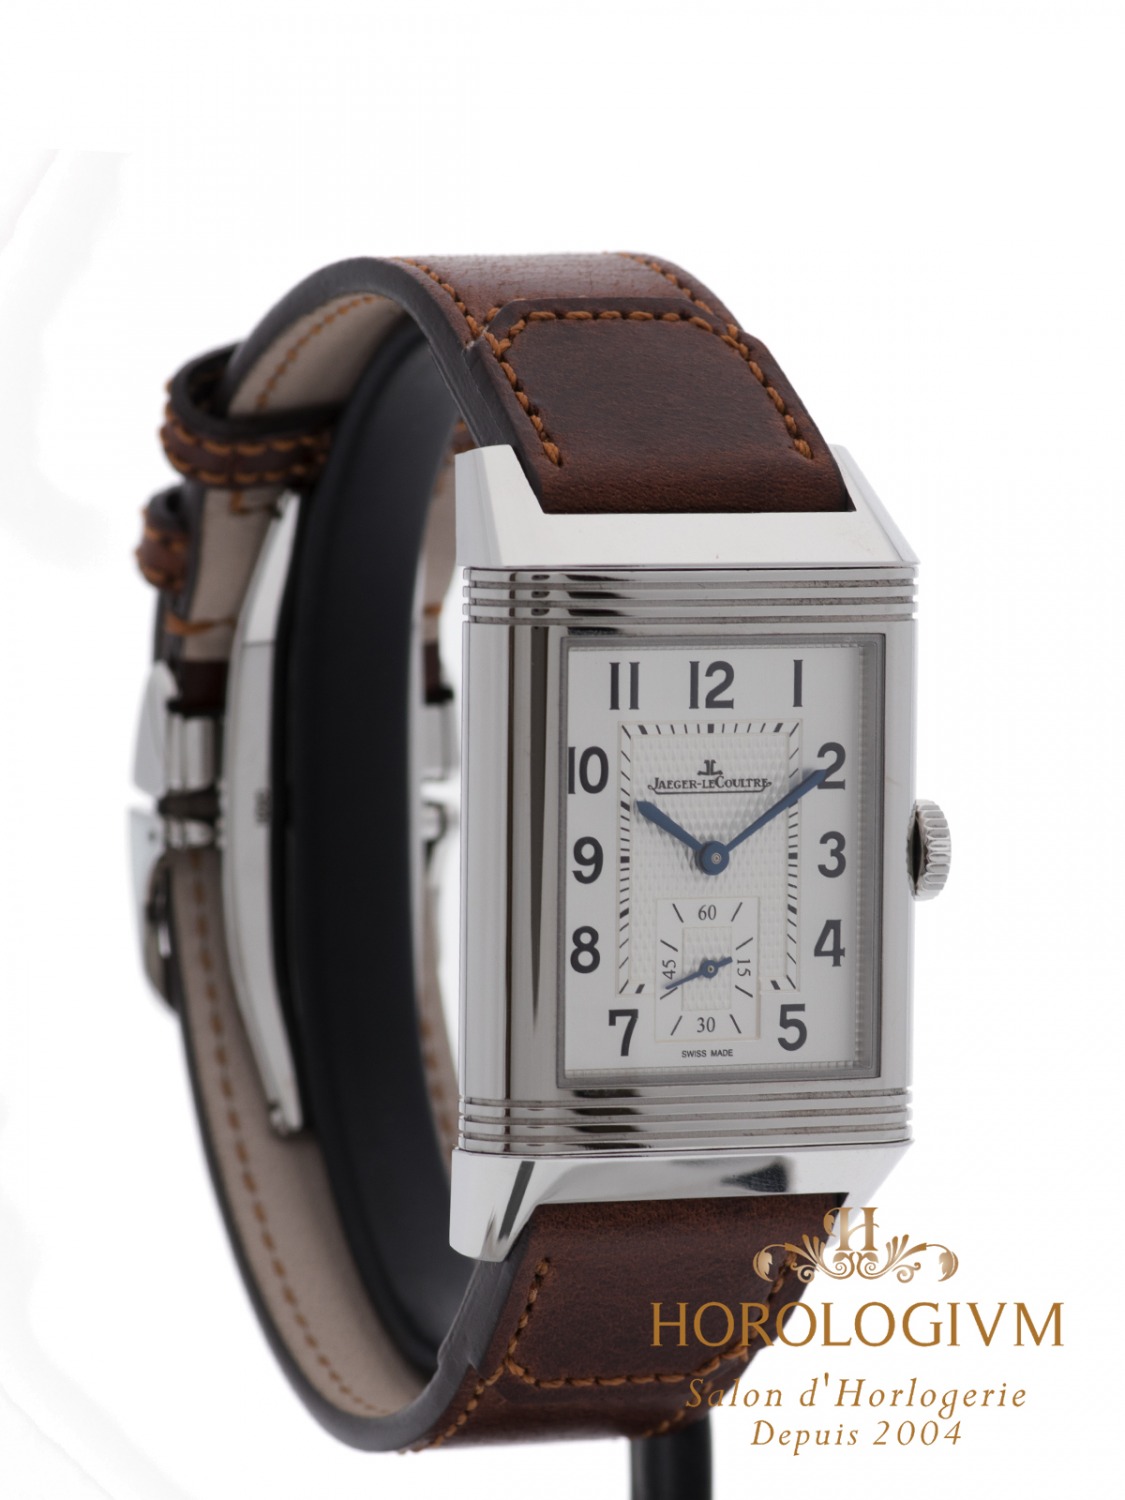 Jaeger LeCoultre CLASSIC LARGE DUOFACE SMALL SECONDS REF. Q3848422 watch, silver